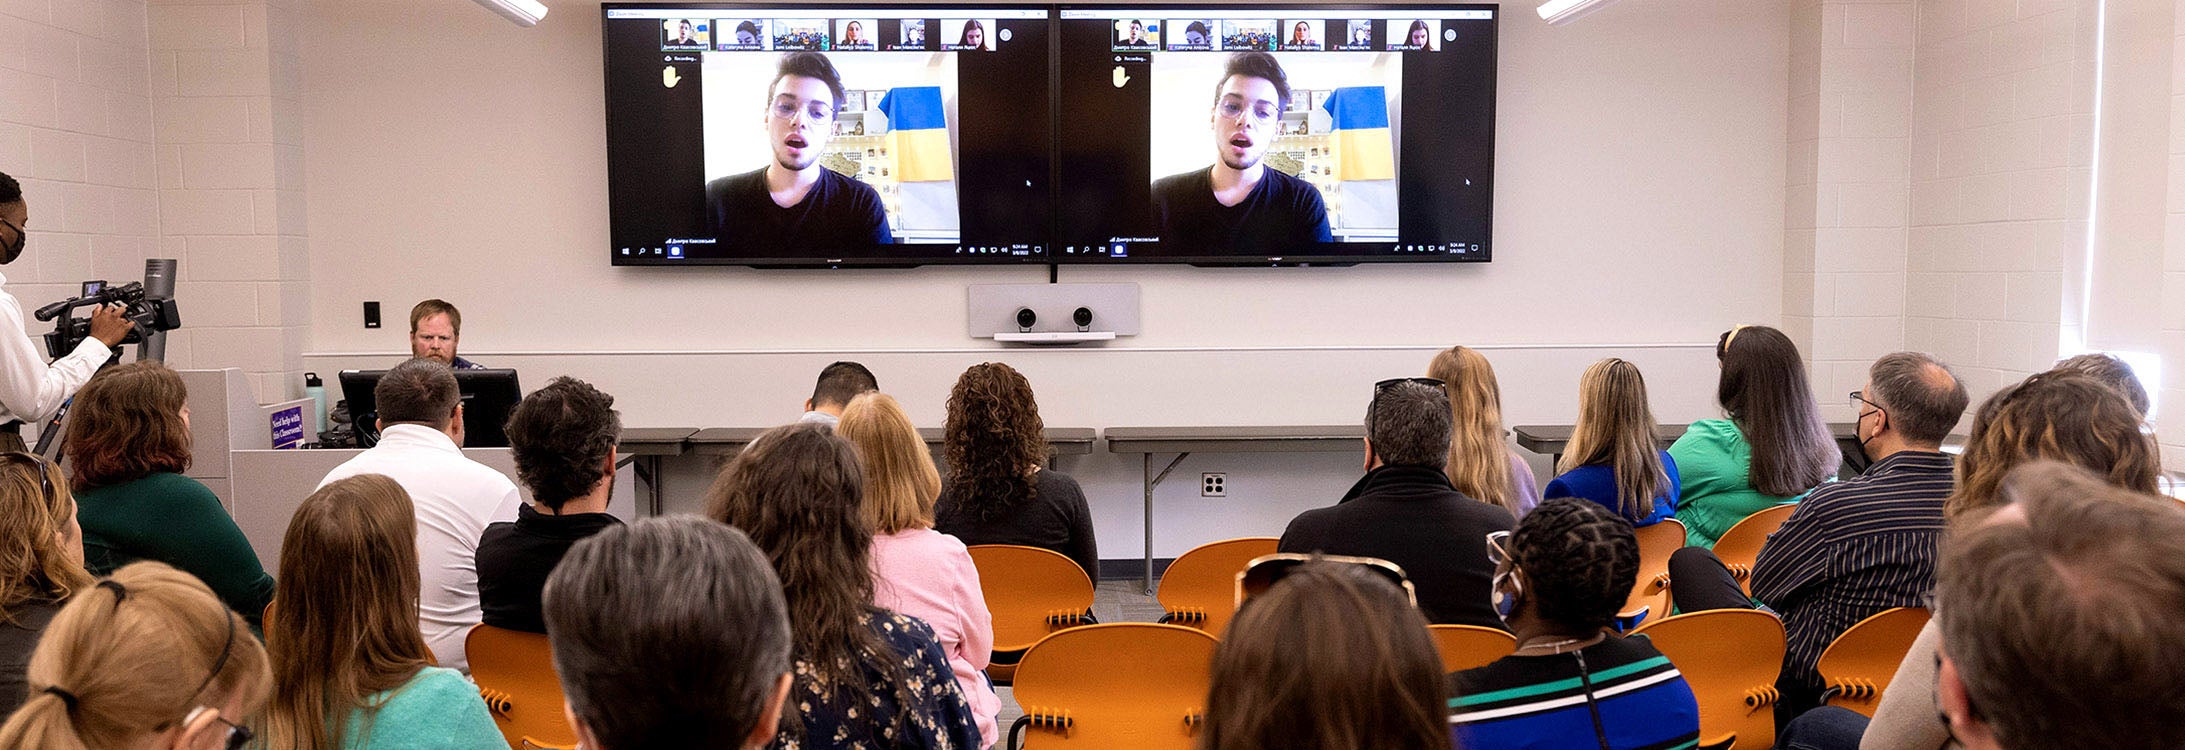 ECU students, faculty and staff listen to a Ukrainian college student discuss the conflict taking place in their country. (Photos by Rhett Butler)